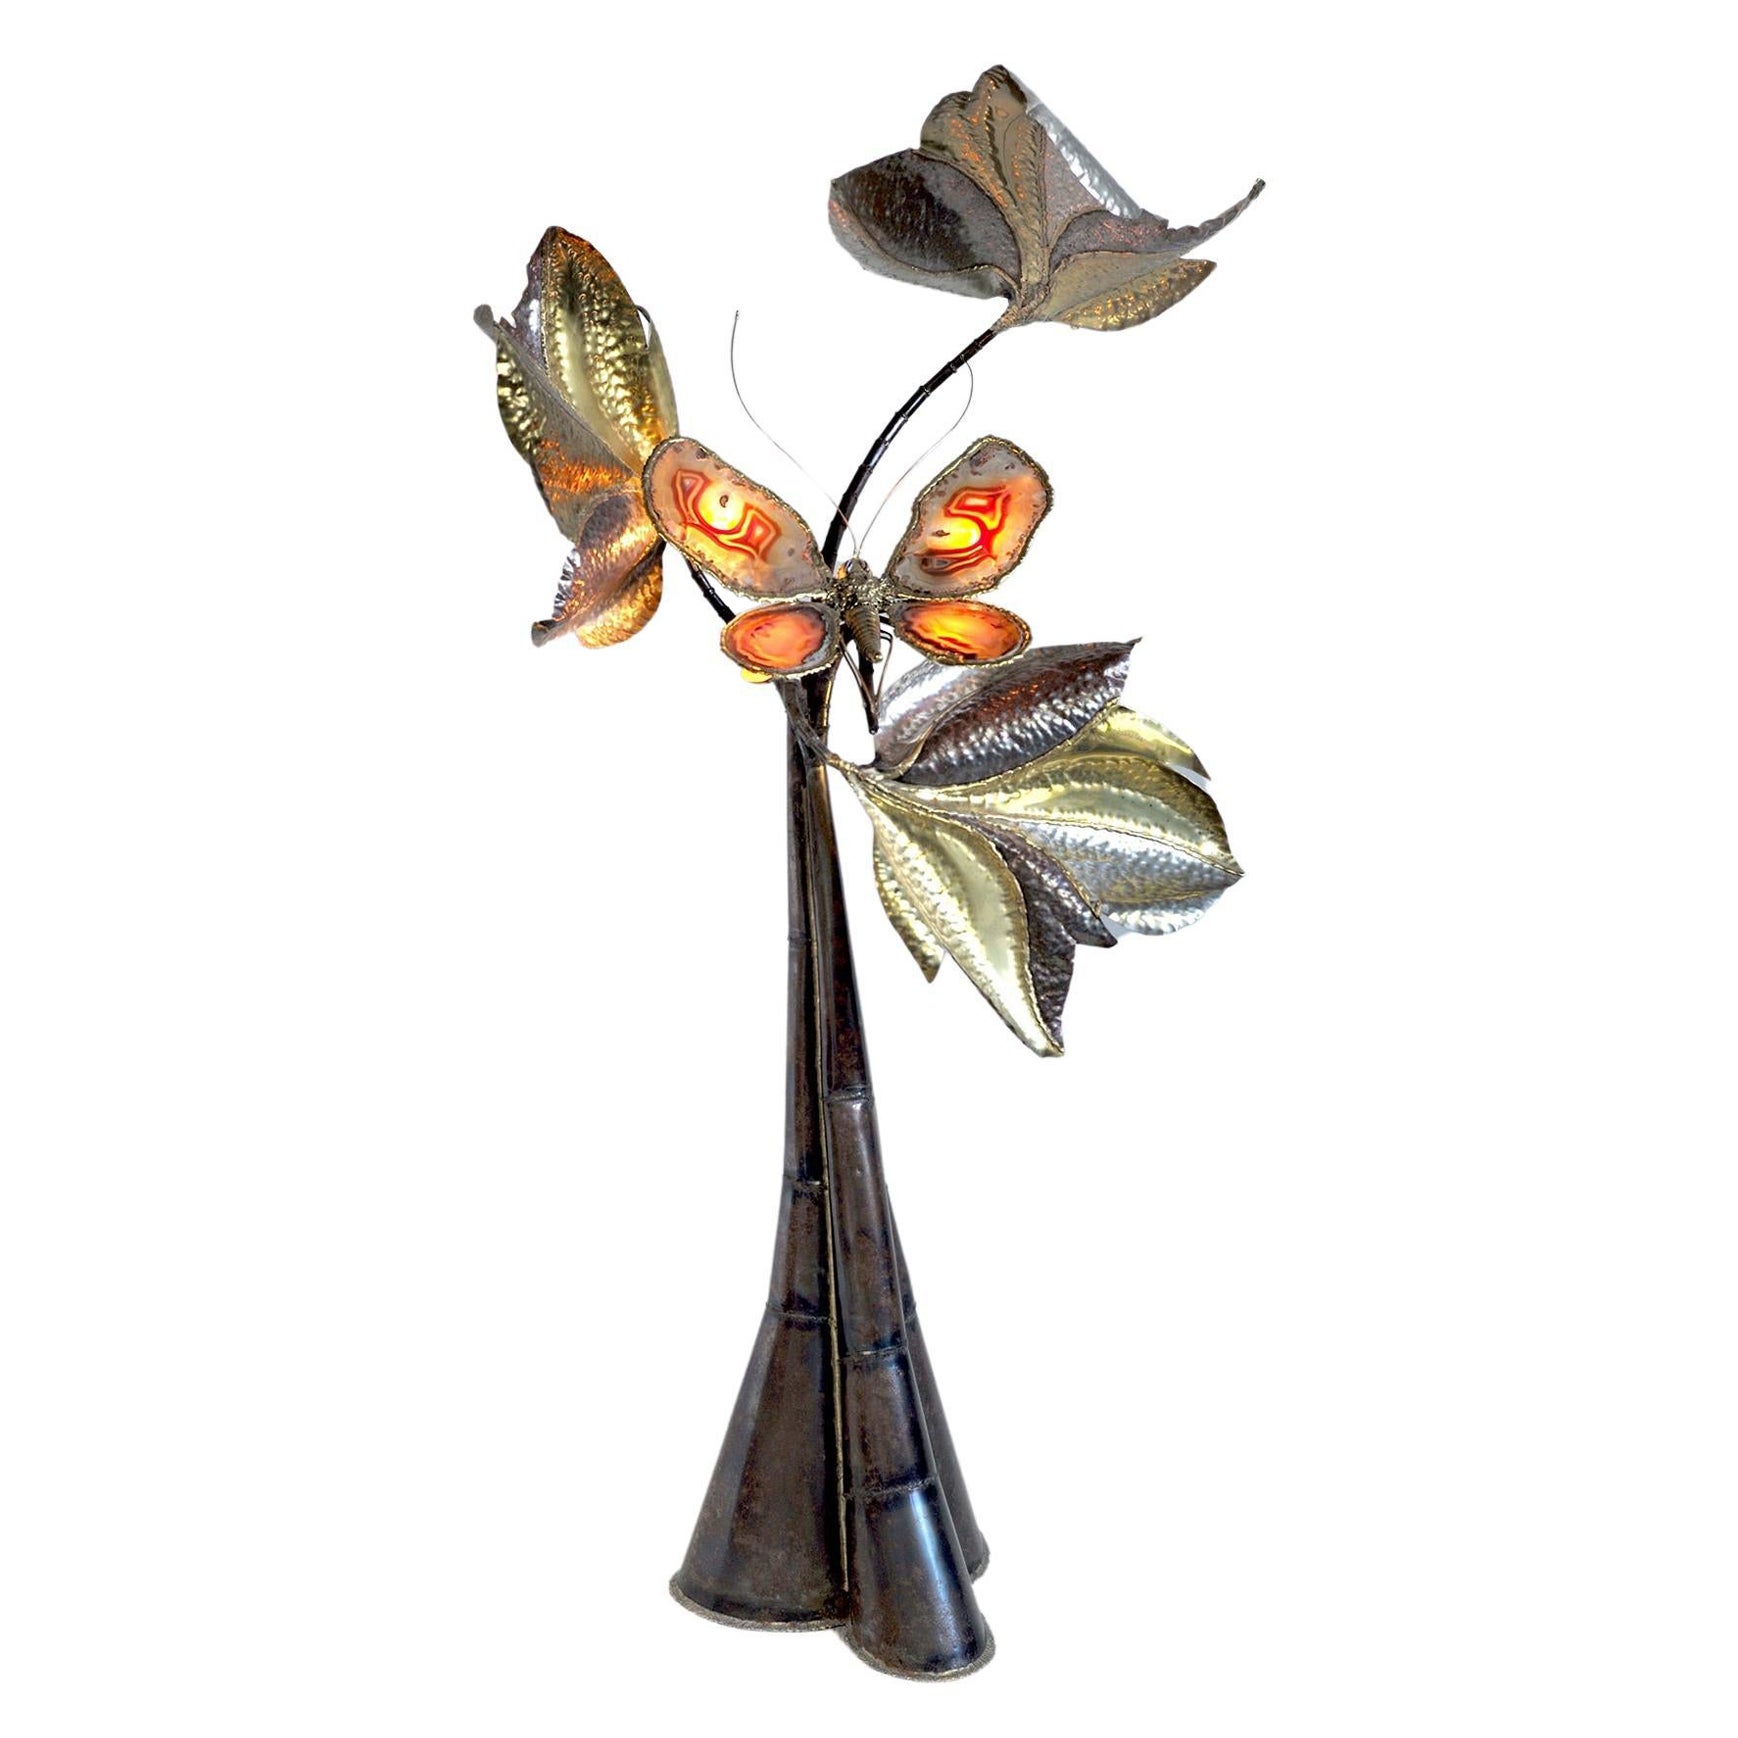 Isabelle Faure, "Butterfly Tree" Floor Lamp, France, 1980